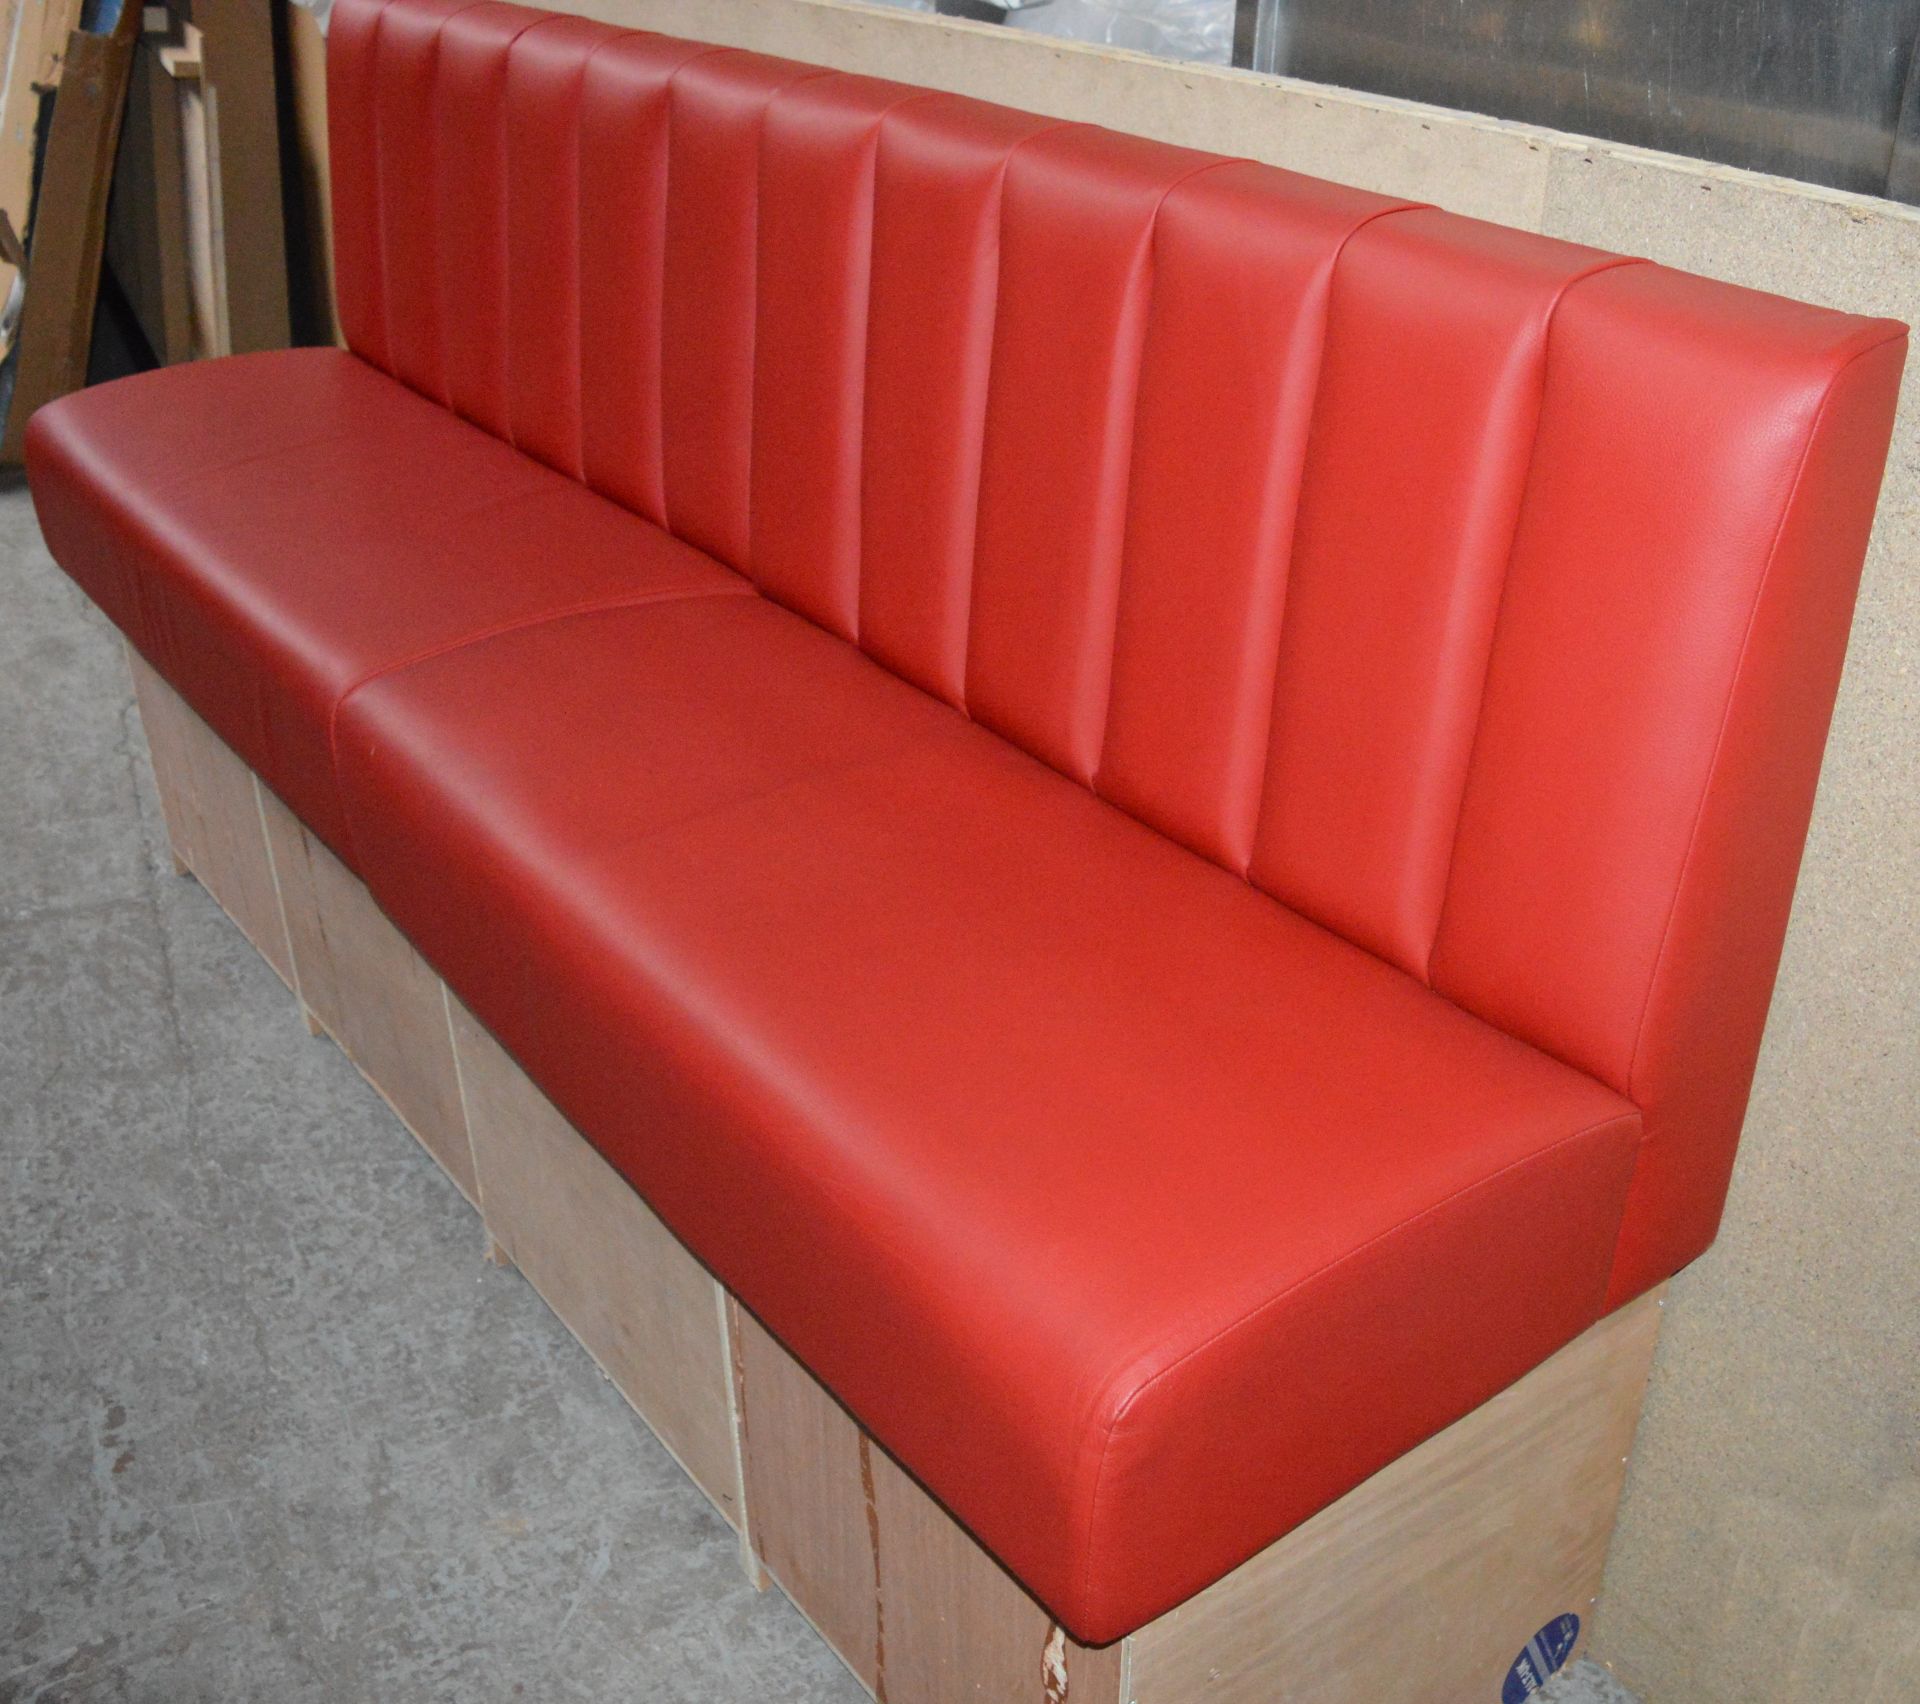 1 x High Seat Double Seating Bench Upholstered in Red Leather - Sits upto Four People - High Quality - Image 2 of 26